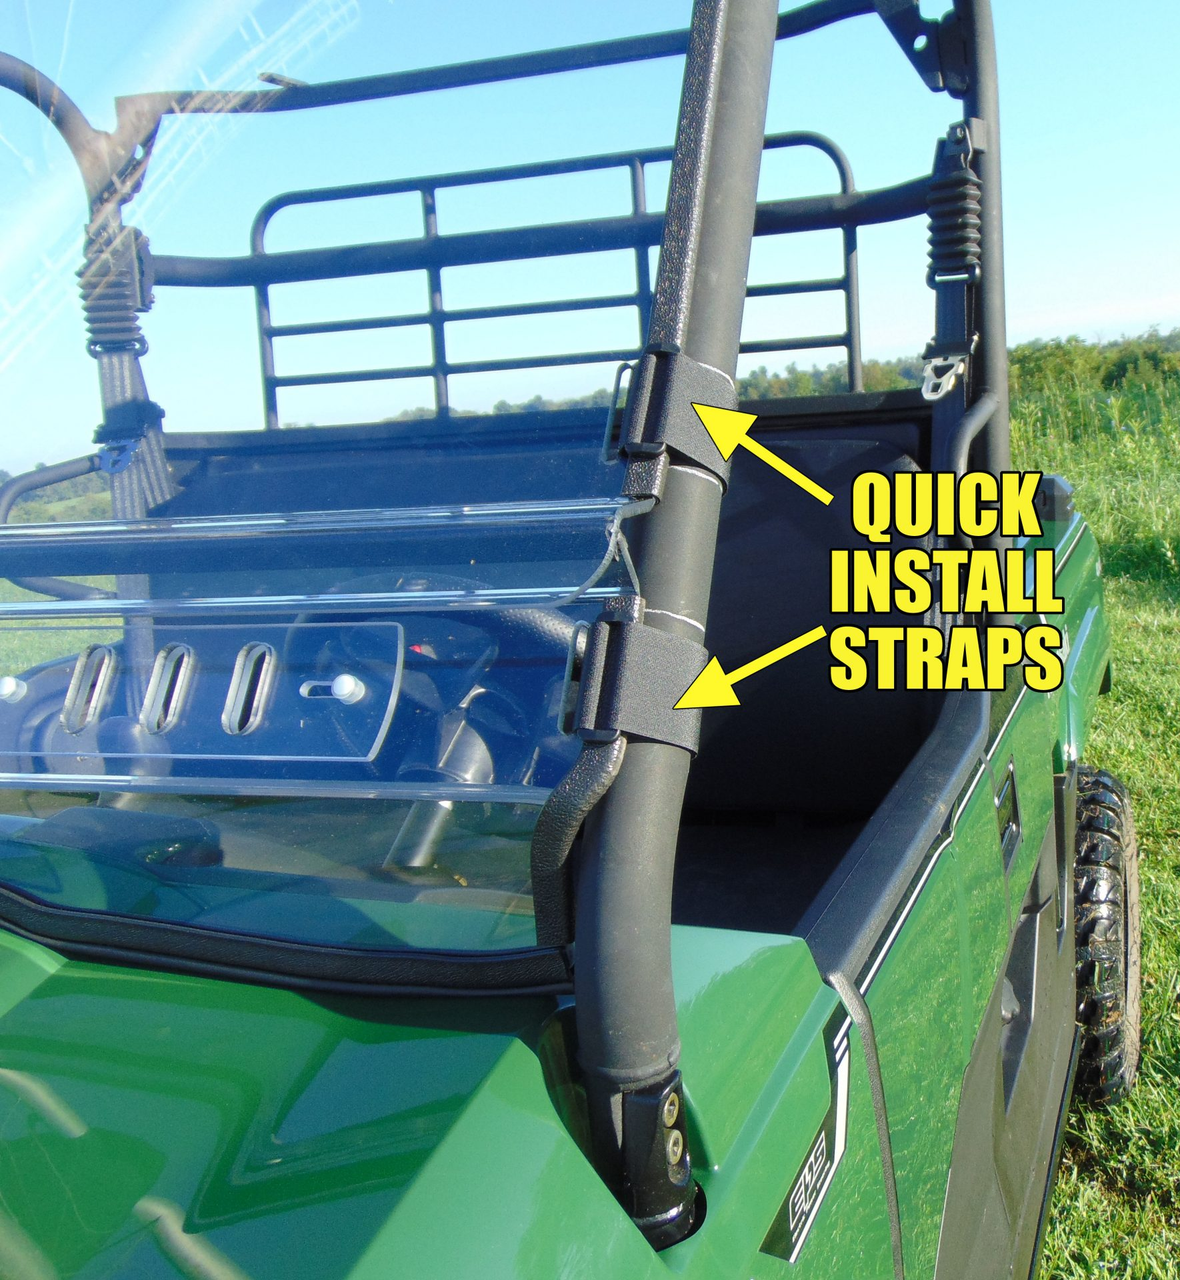 3 Star side x side Cub Cadet Challenger 500/700 windshield quick install straps